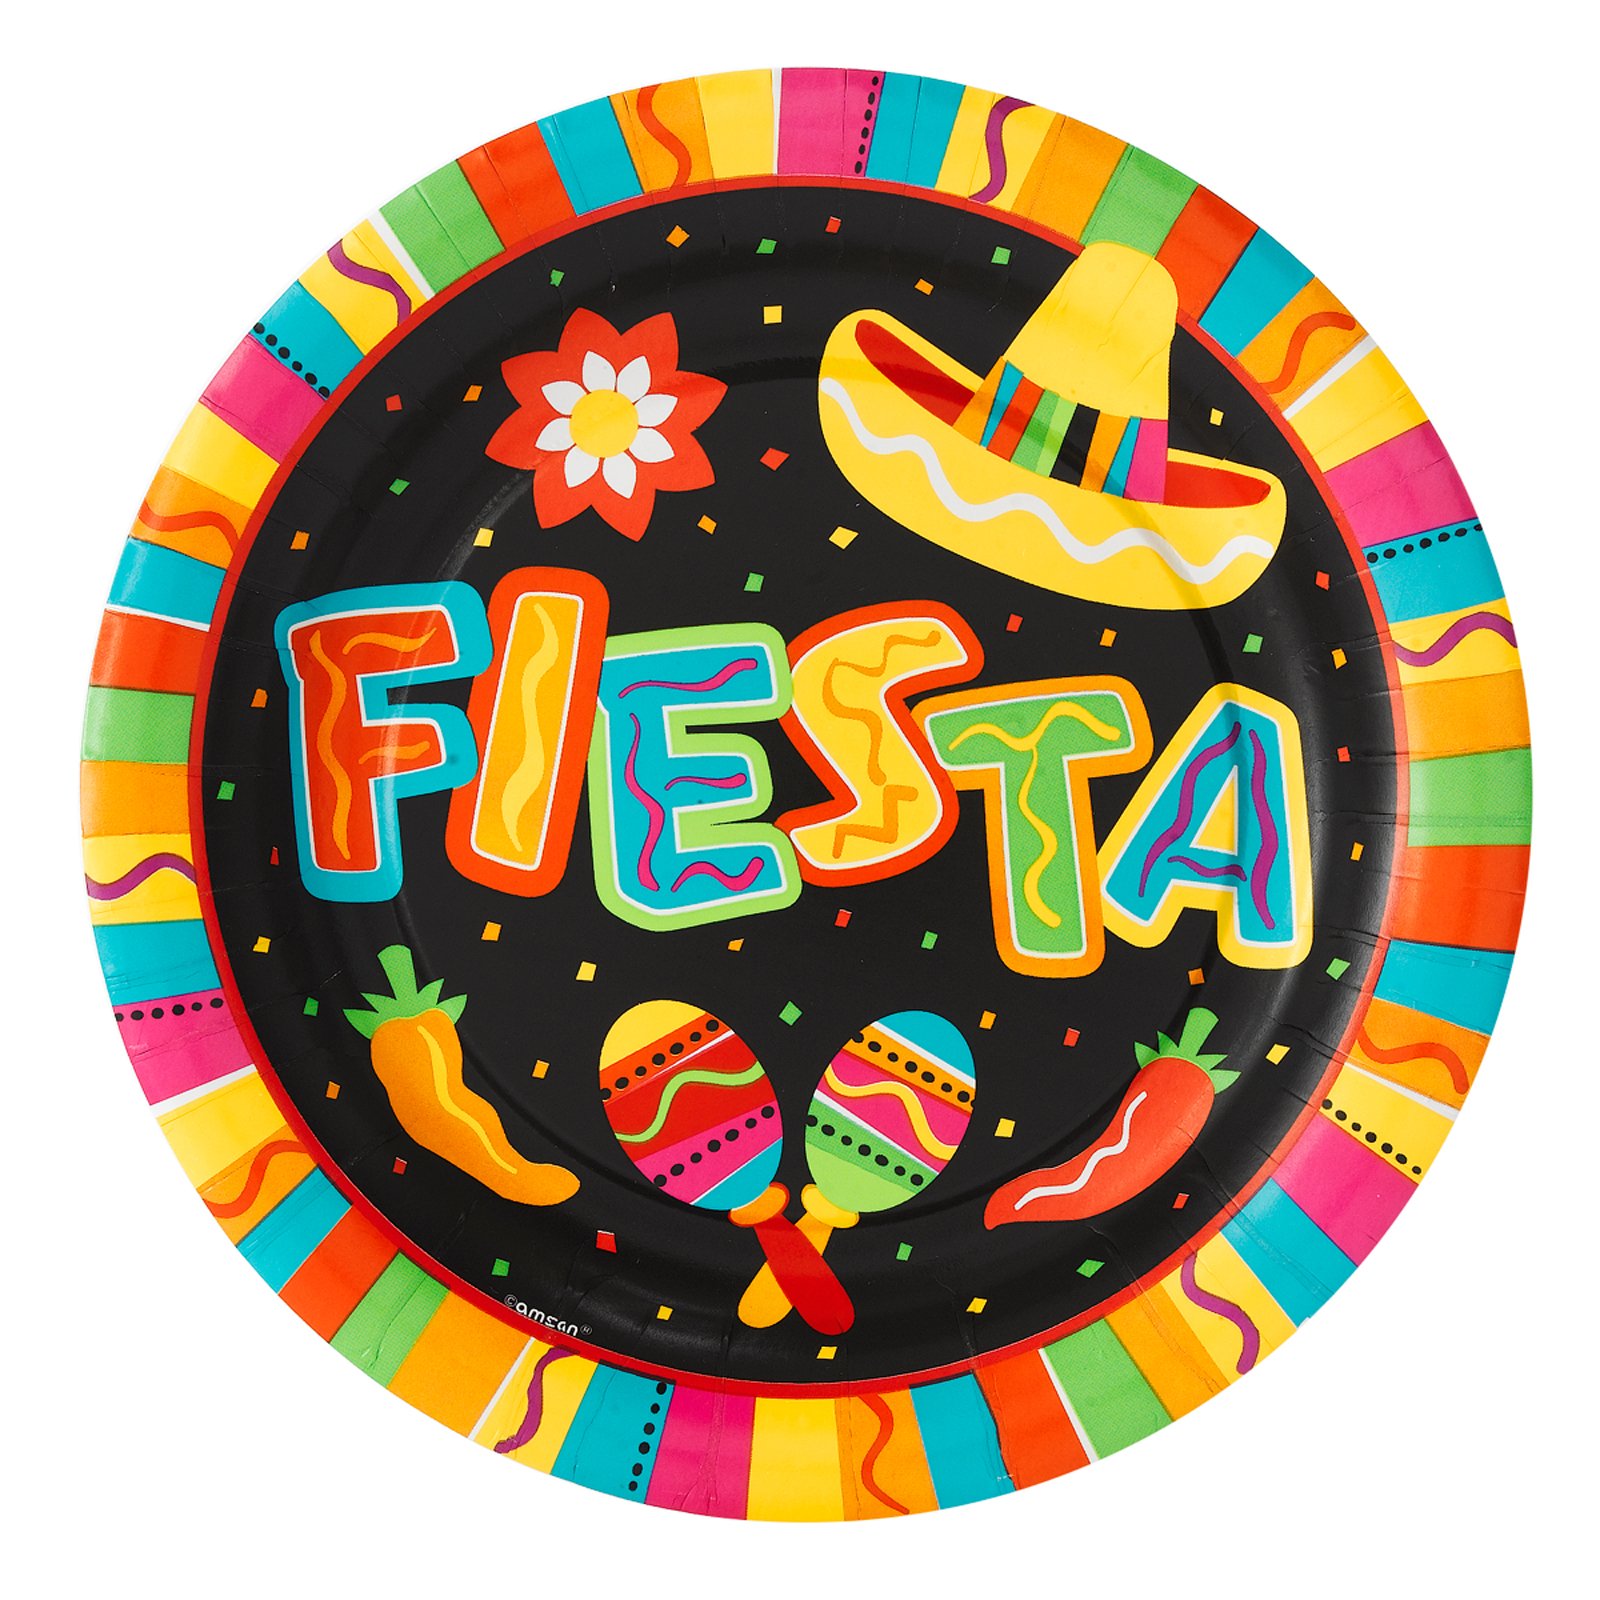 Girl Wele To The Very First Festive Friday Fiesta Link Party